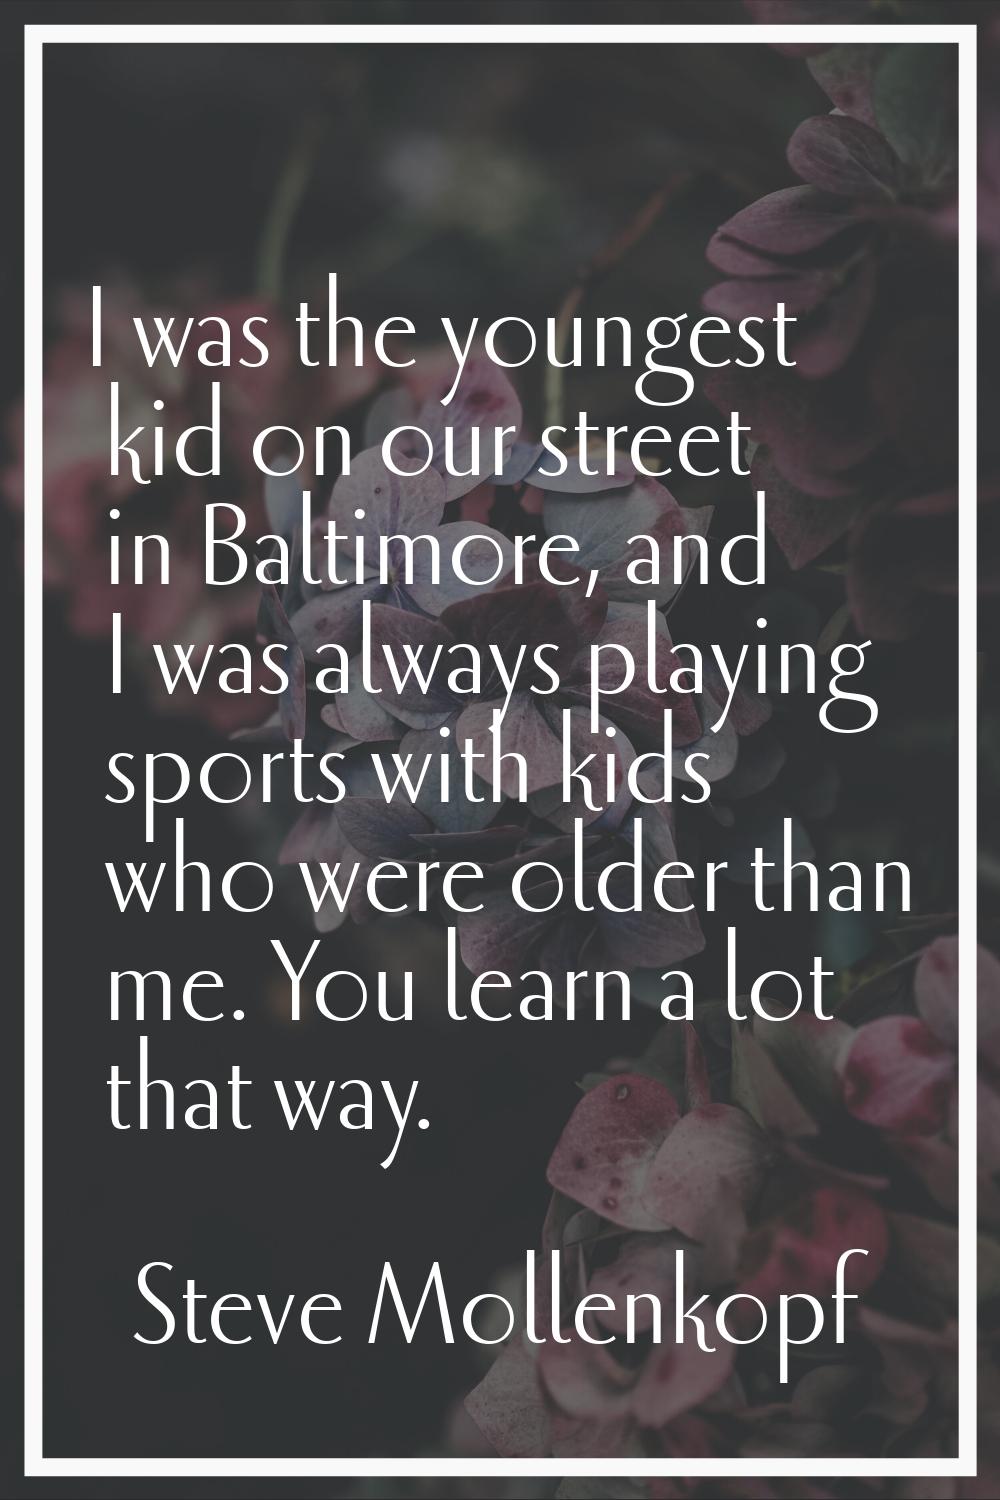 I was the youngest kid on our street in Baltimore, and I was always playing sports with kids who we